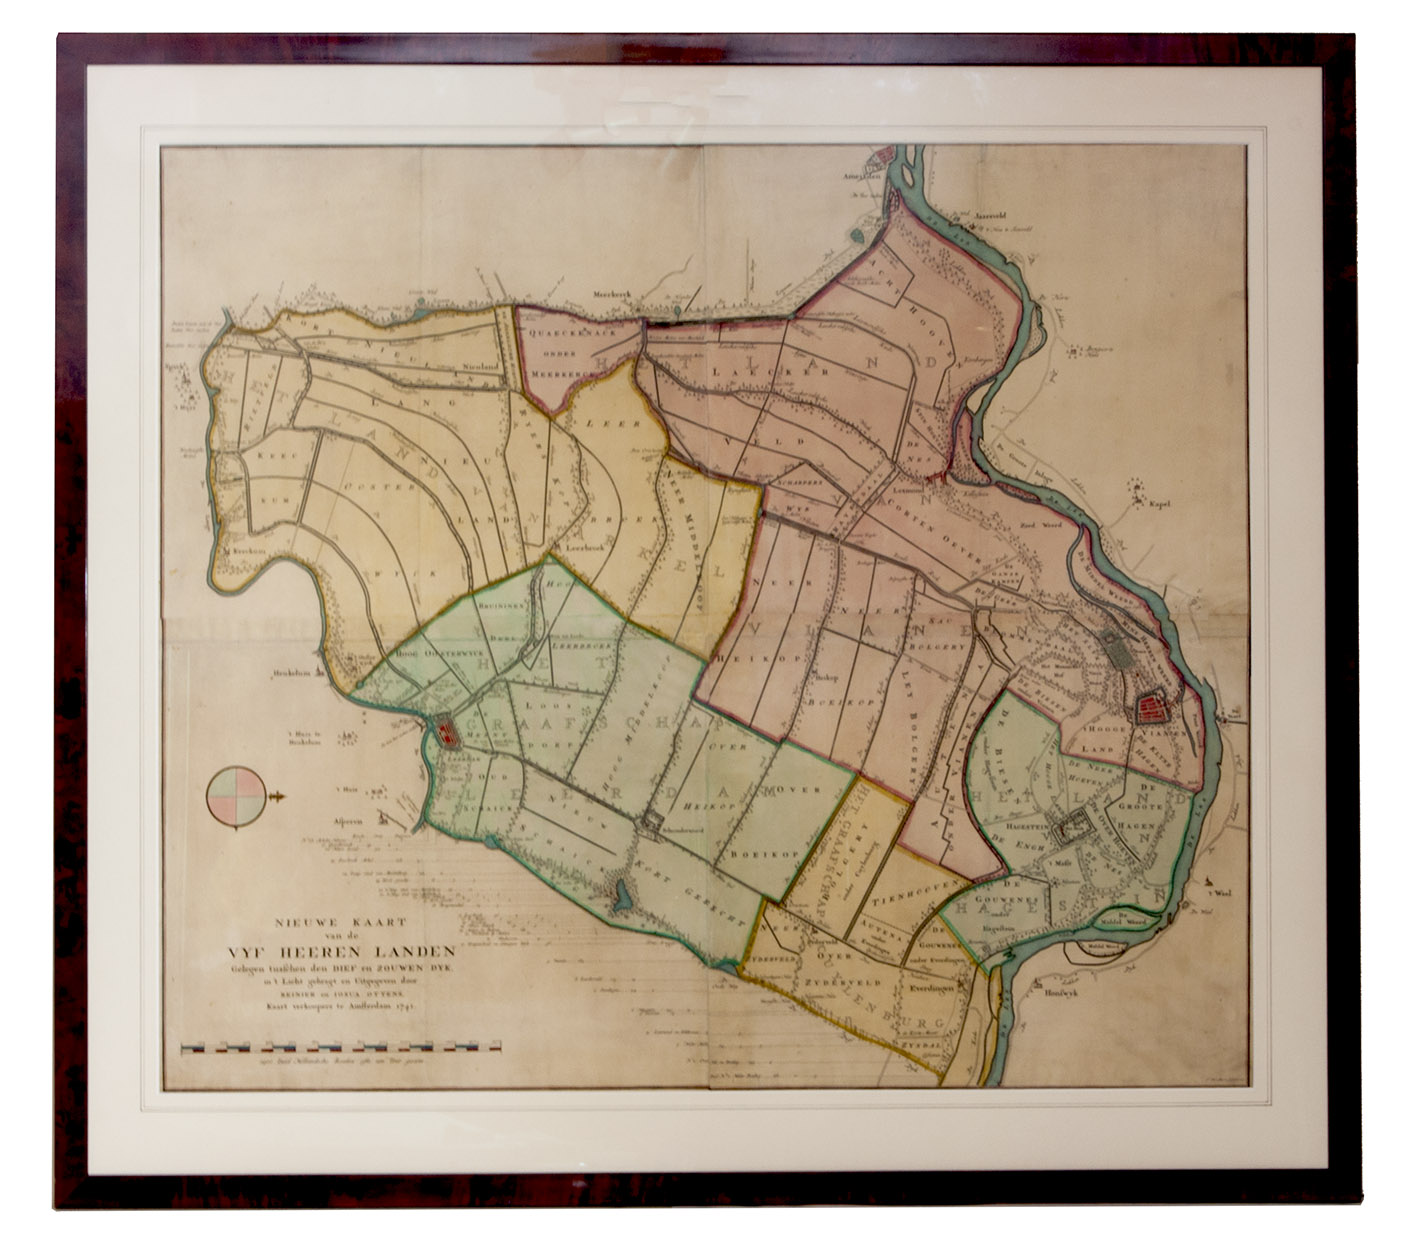 OTTENS, Reinier and Josua OTTENS. - Nieuwe kaart van de Vyf Heeren landen gelegen tusschen den Dief en Zouwen dyk.Amsterdam, Reinier and Josua Ottens, 1741. Engraved map on 4 sheets (85 x 98 cm as assembled), coloured by a contemporary hand. With the title and publisher at the foot left, together with a scale (ca. 1:19,000) and the name of the engraver at the right (Jan van Jagen). Framed.